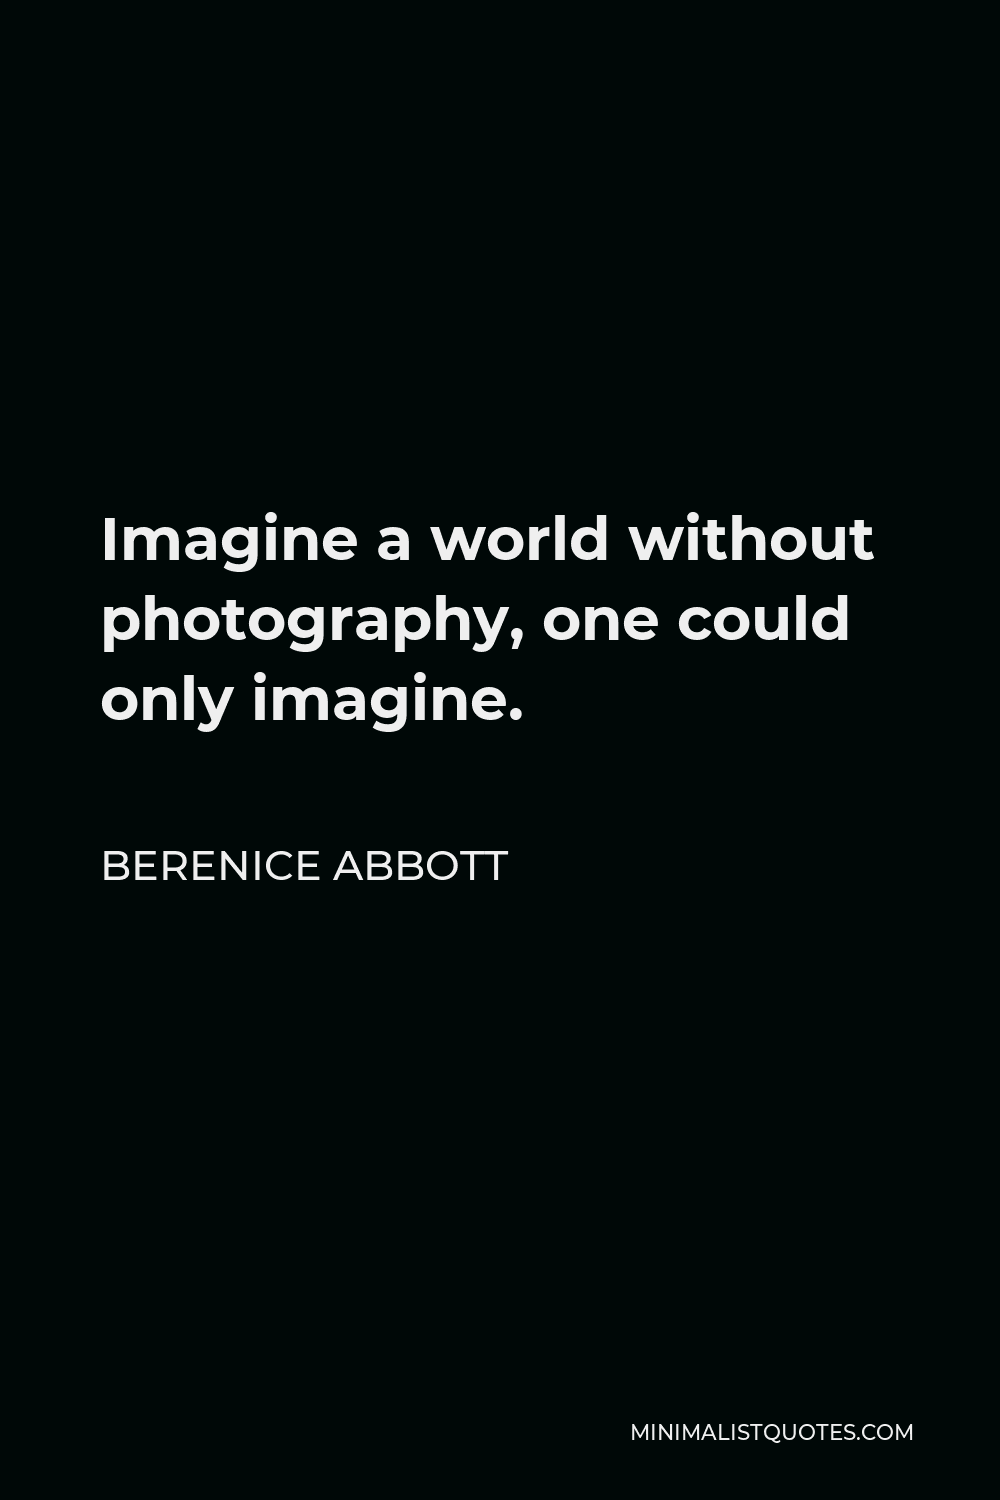 Berenice Abbott Quote - Imagine a world without photography, one could only imagine.